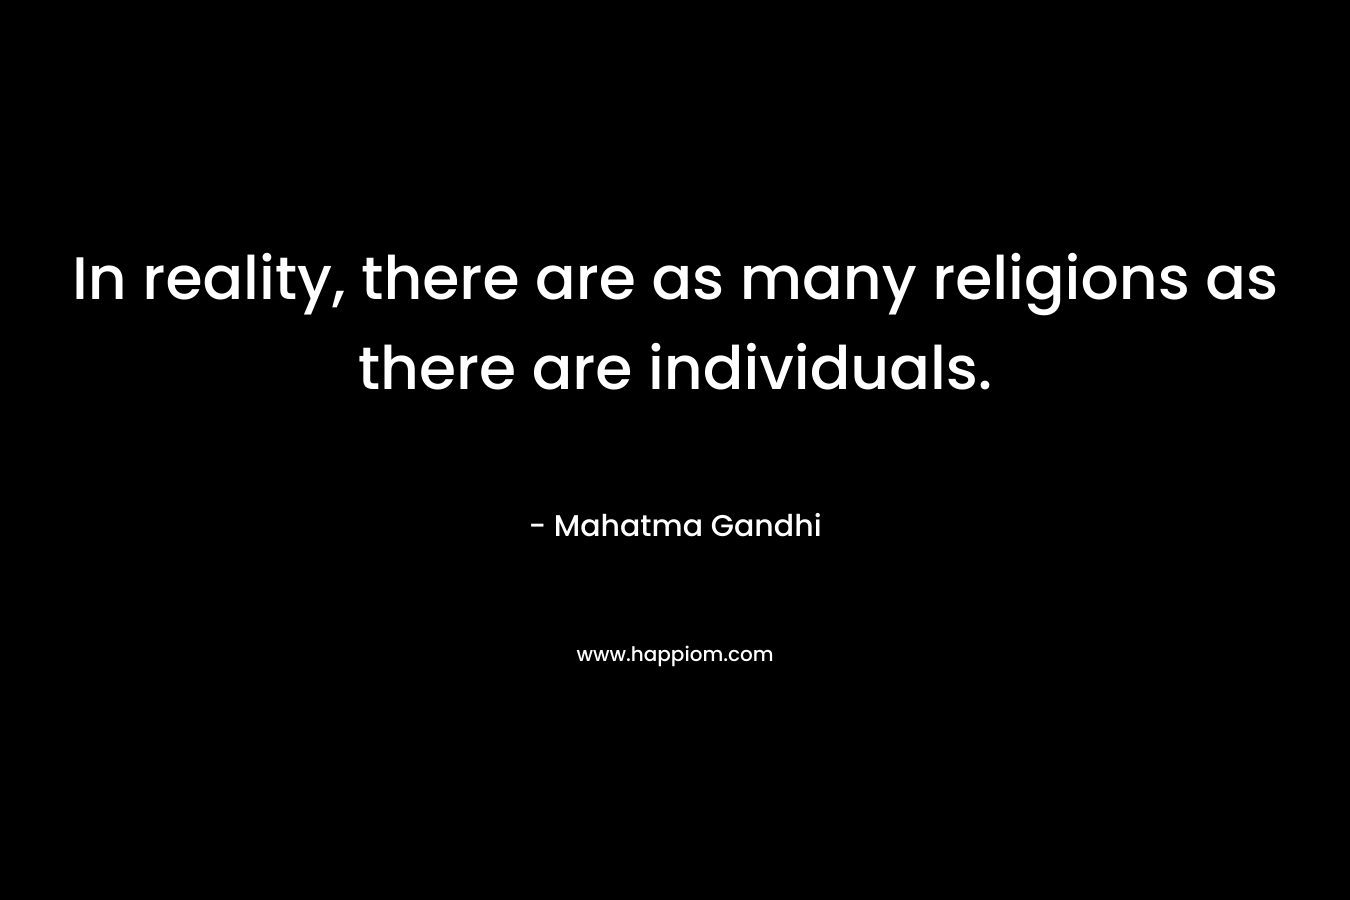 In reality, there are as many religions as there are individuals. – Mahatma Gandhi